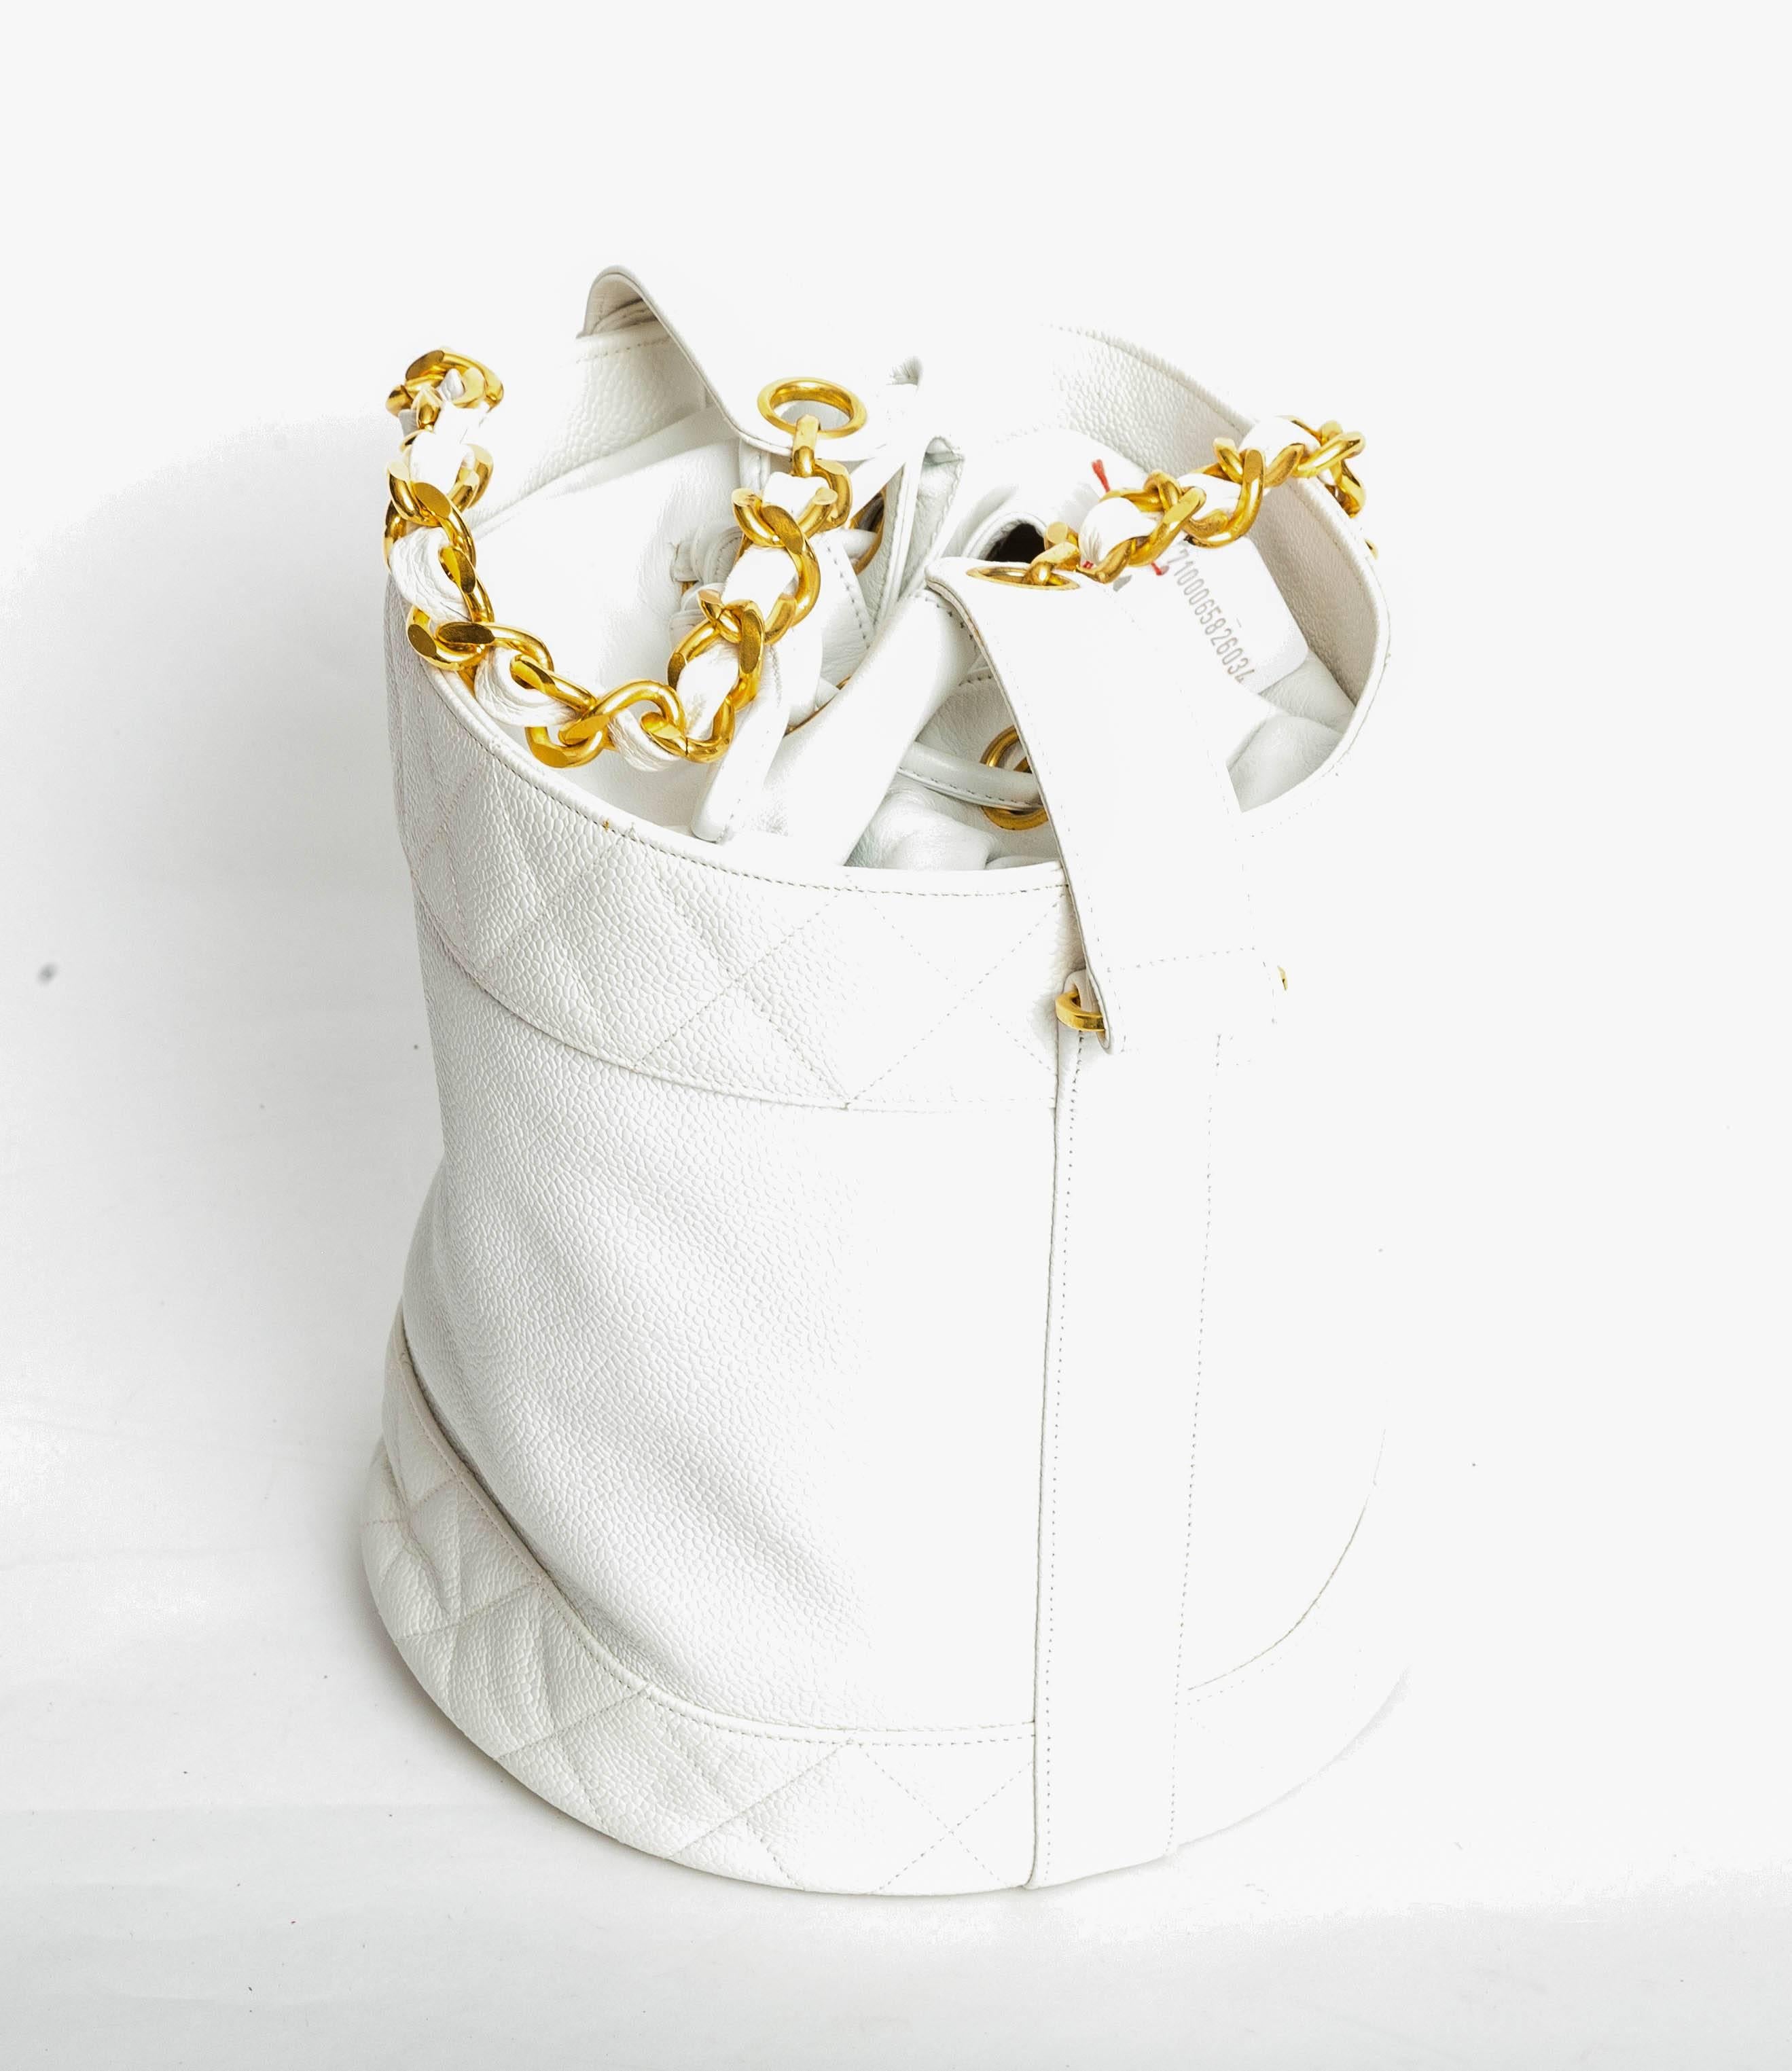 Incredibly Chic Chanel White Caviar Drawstring Bucket Bag With Gold Hardware 
Excellent Condition
Attached small pouch.
One tiny mark to interior. Exterior including bottom of bag is in excellent condition.
Hologram and authenticity card number